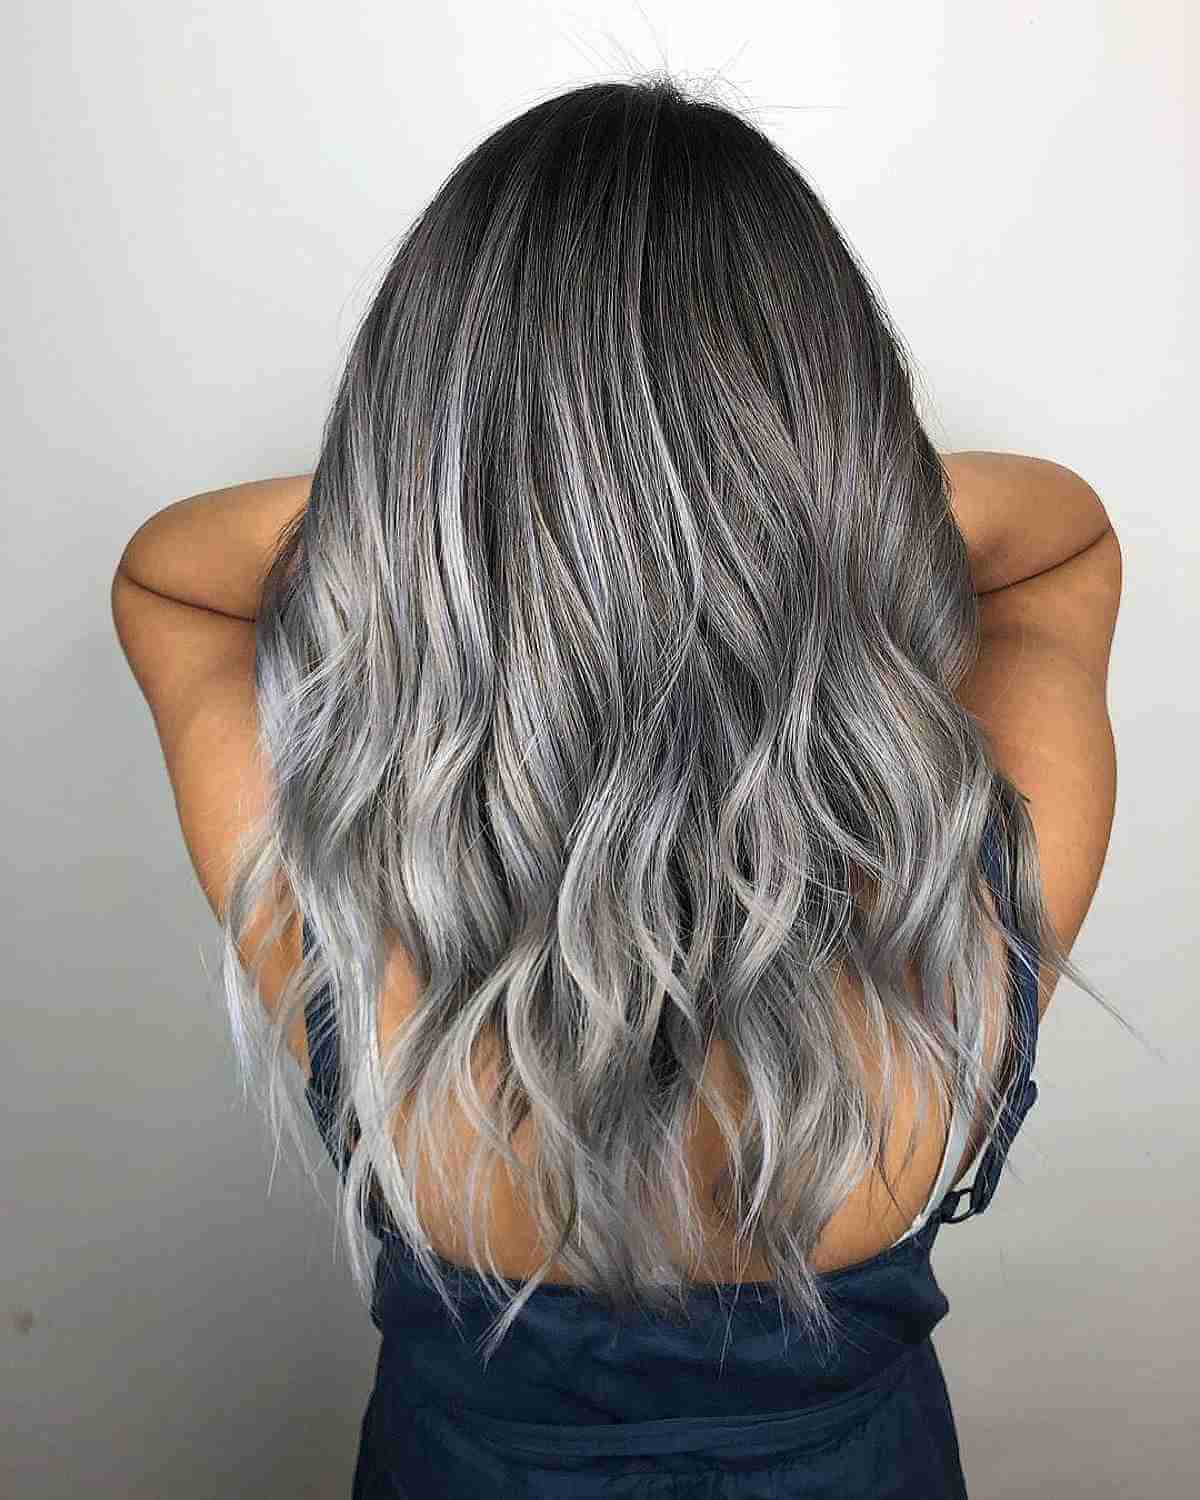 42 Types of Ash Blonde Hair Colors &amp; Trendy Ways to Get It